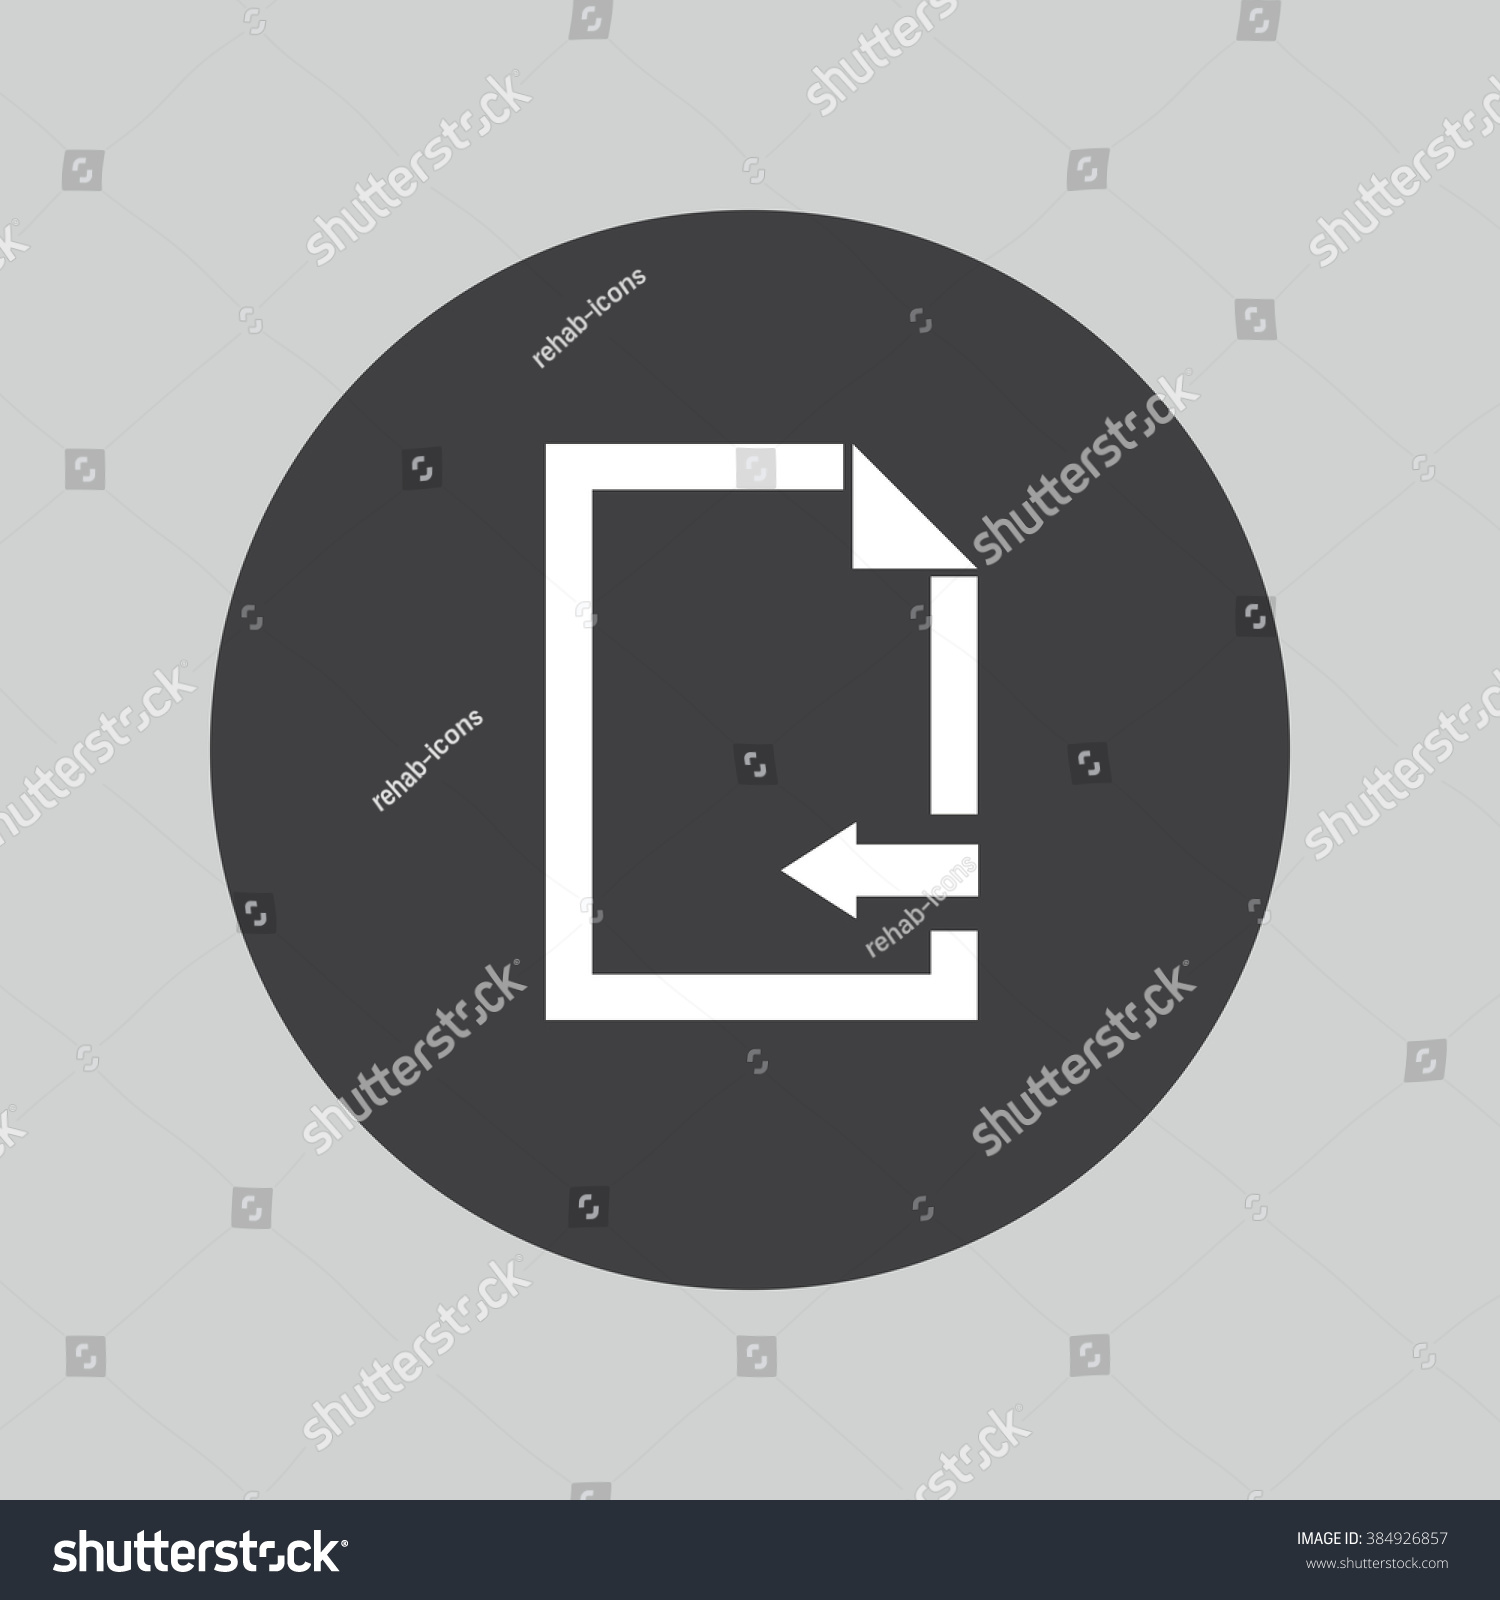 Turn Page Sign Icon Stock Vector 384926857 - Shutterstock